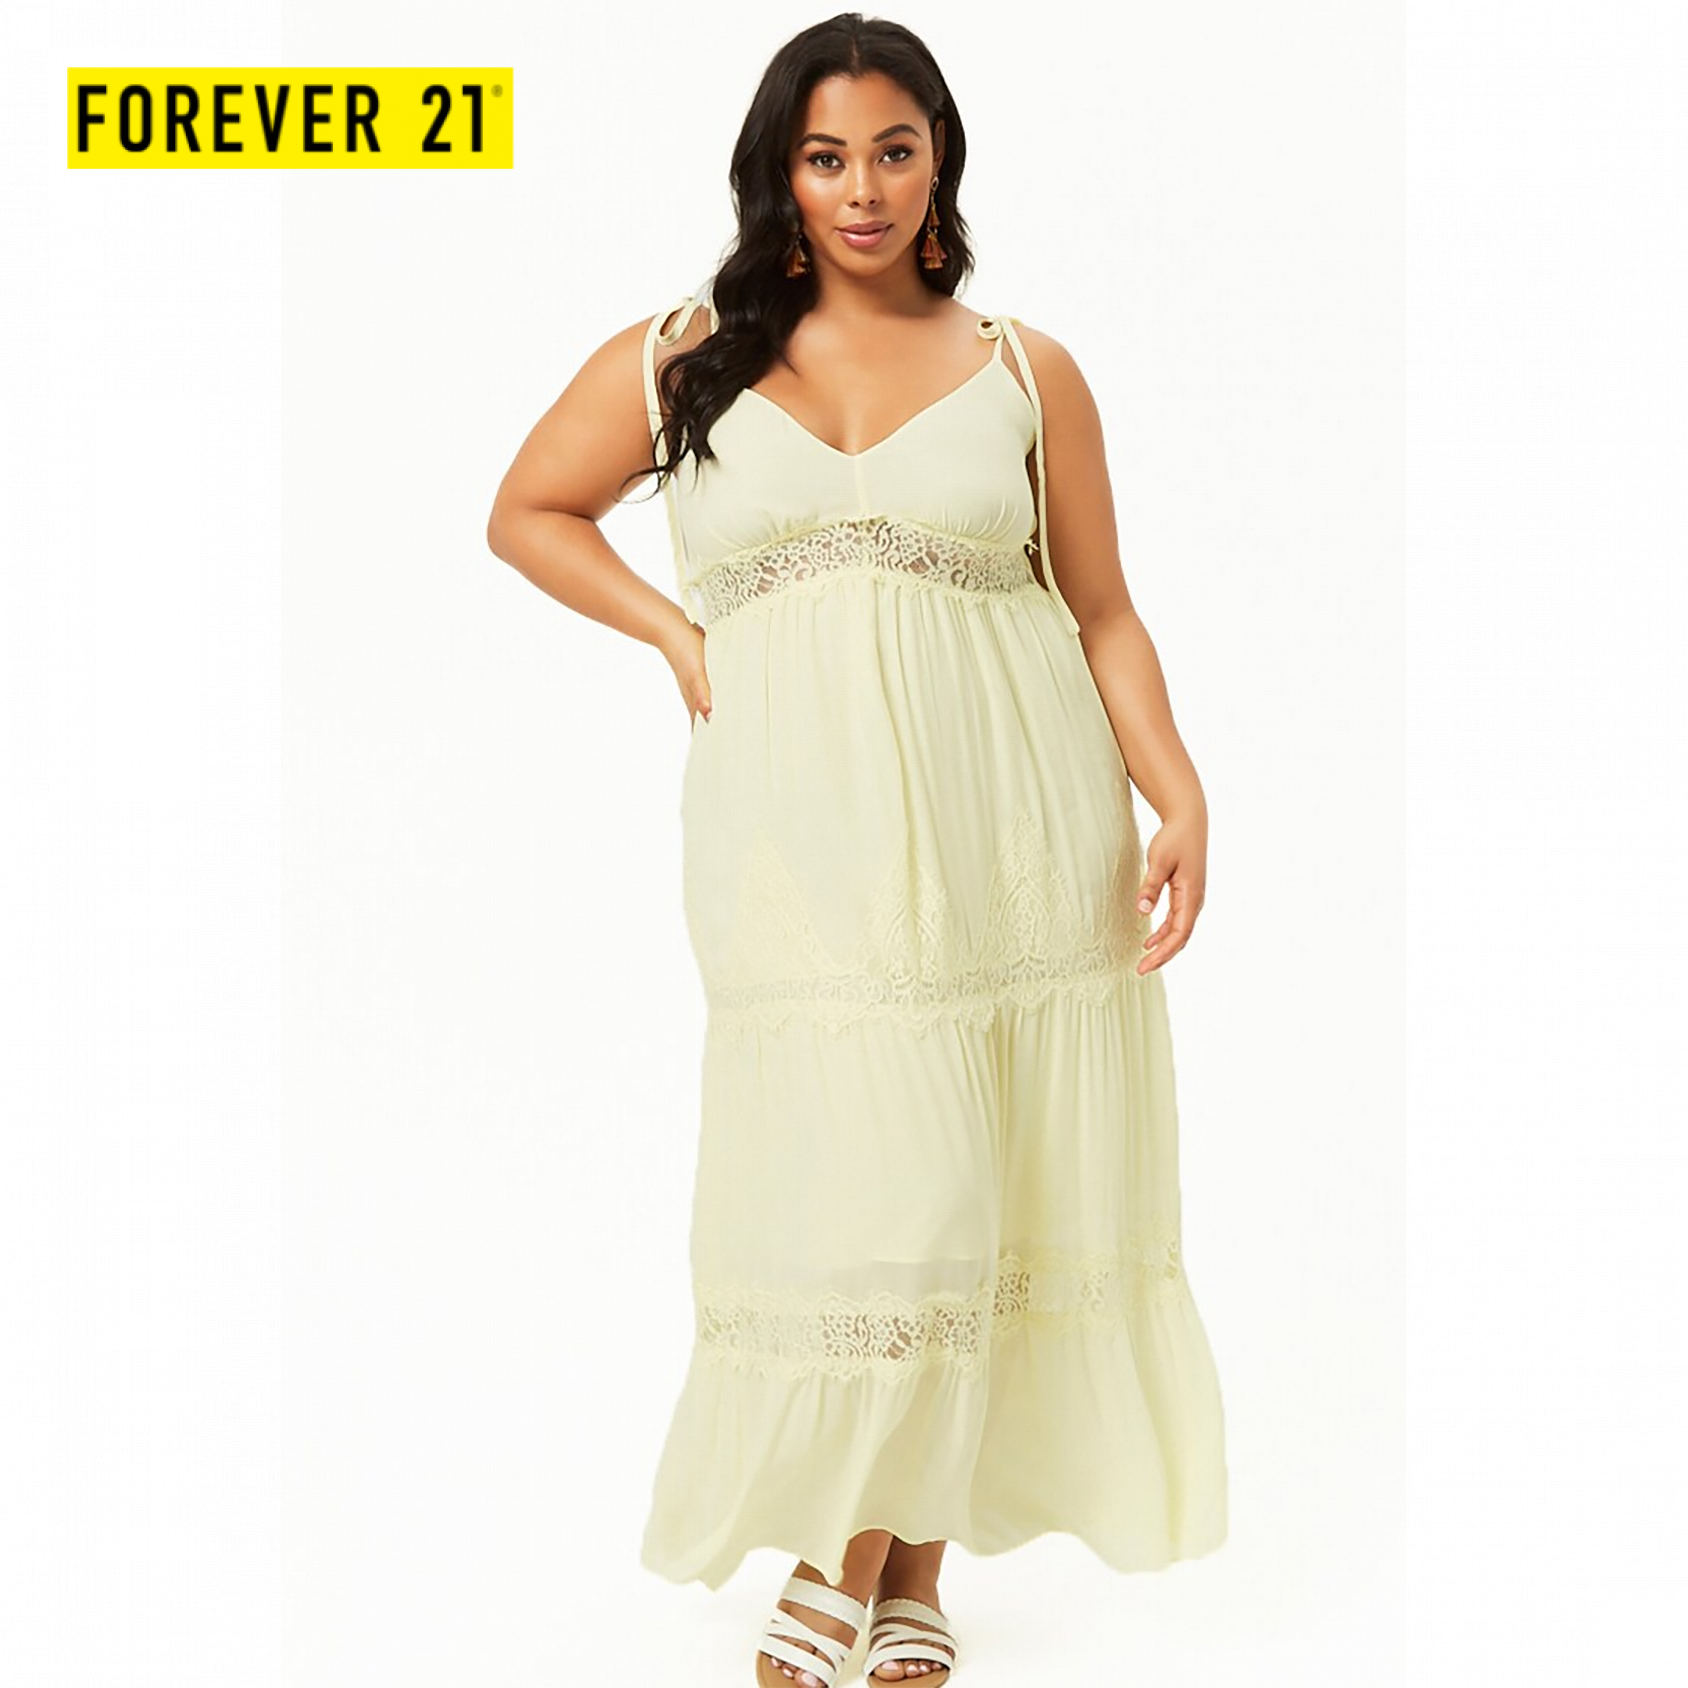 Yellow Lace Dress Forever 21 2017 2018 Newclotheshop